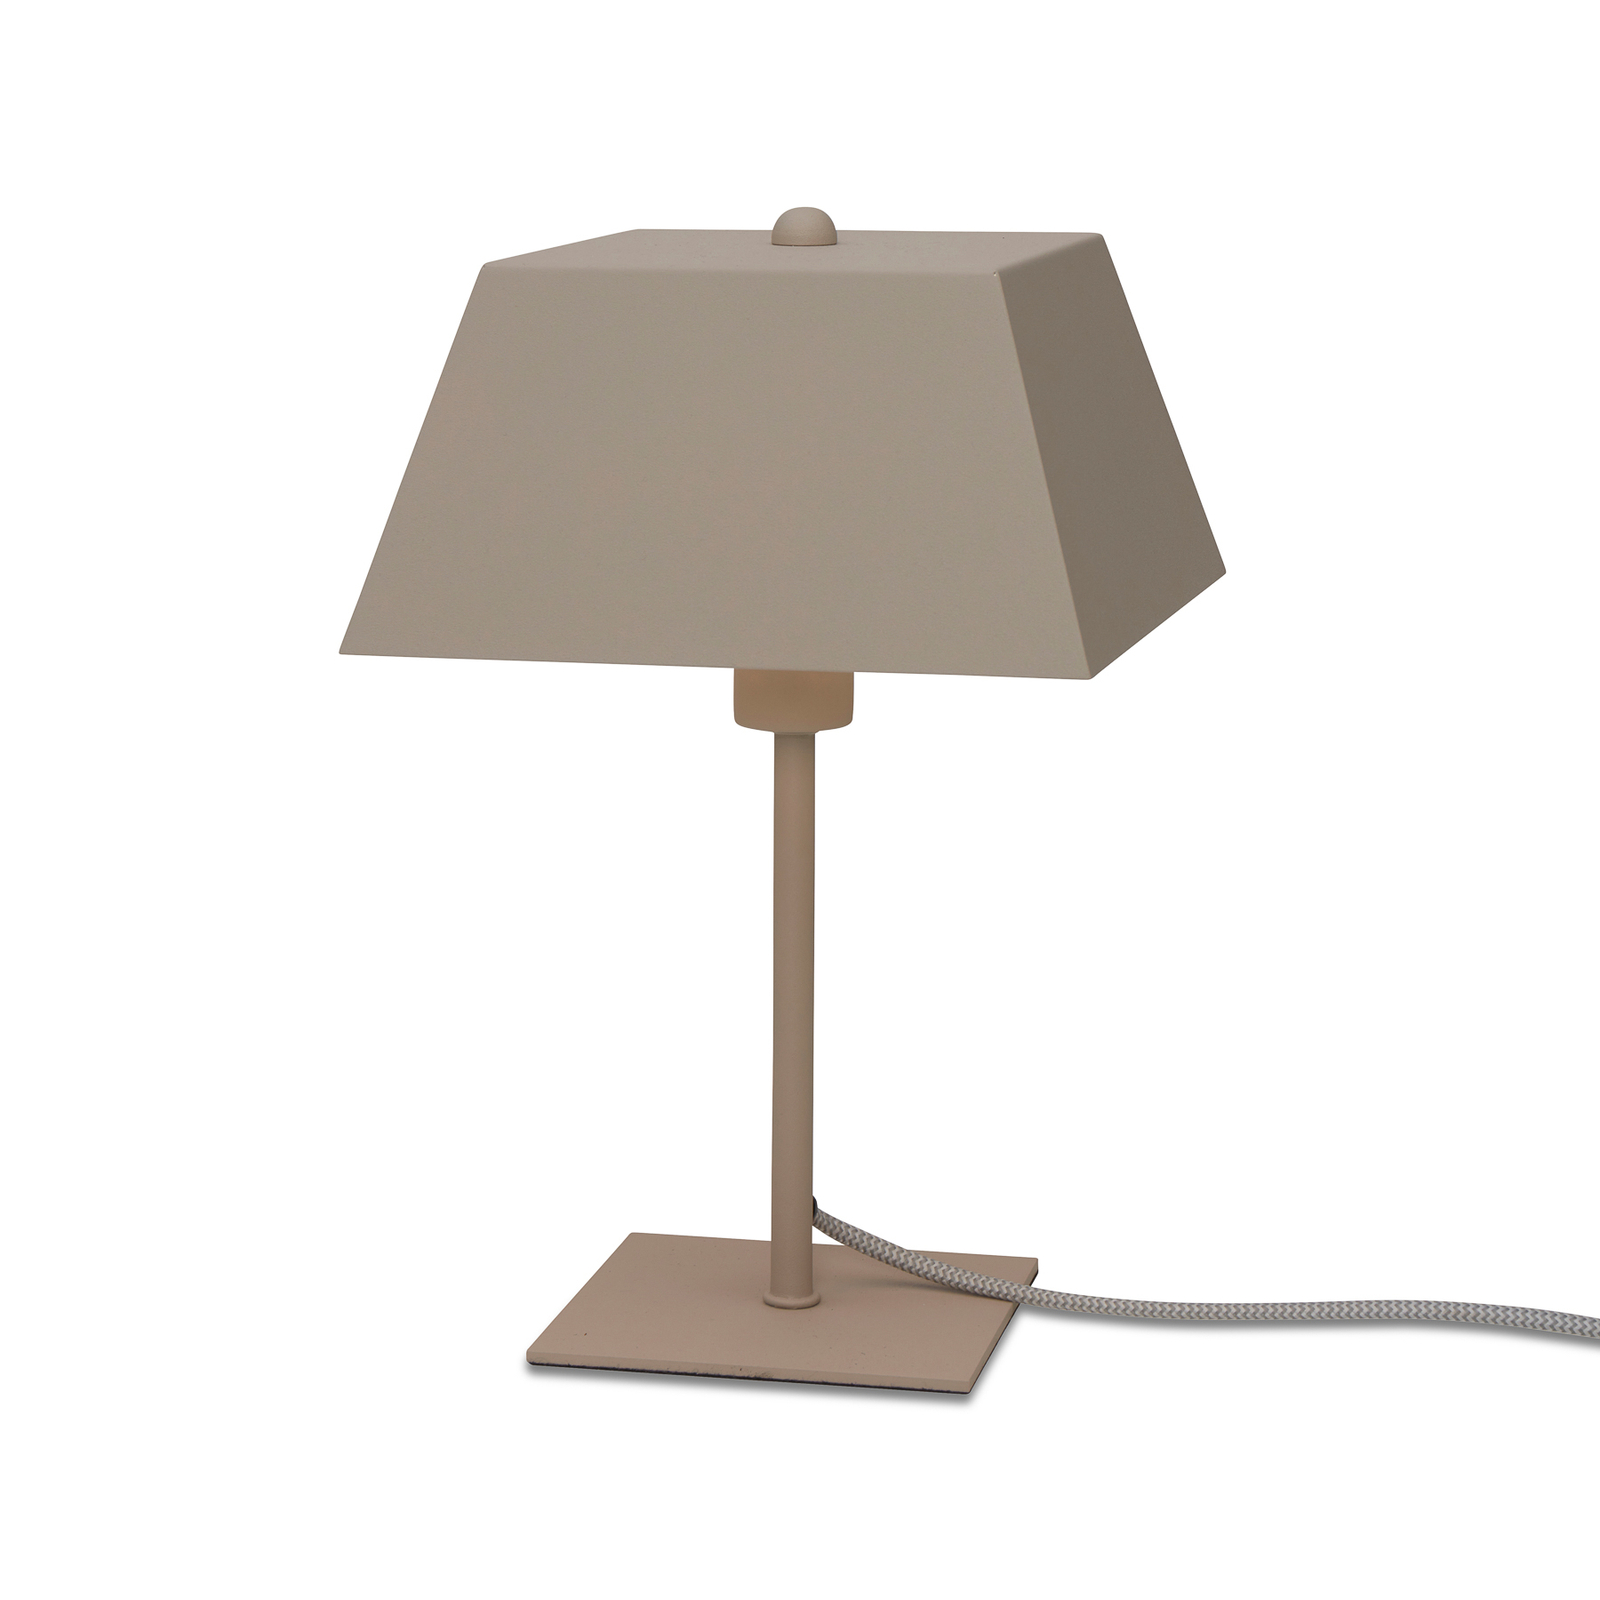 It's about RoMi table lamp Perth, sand